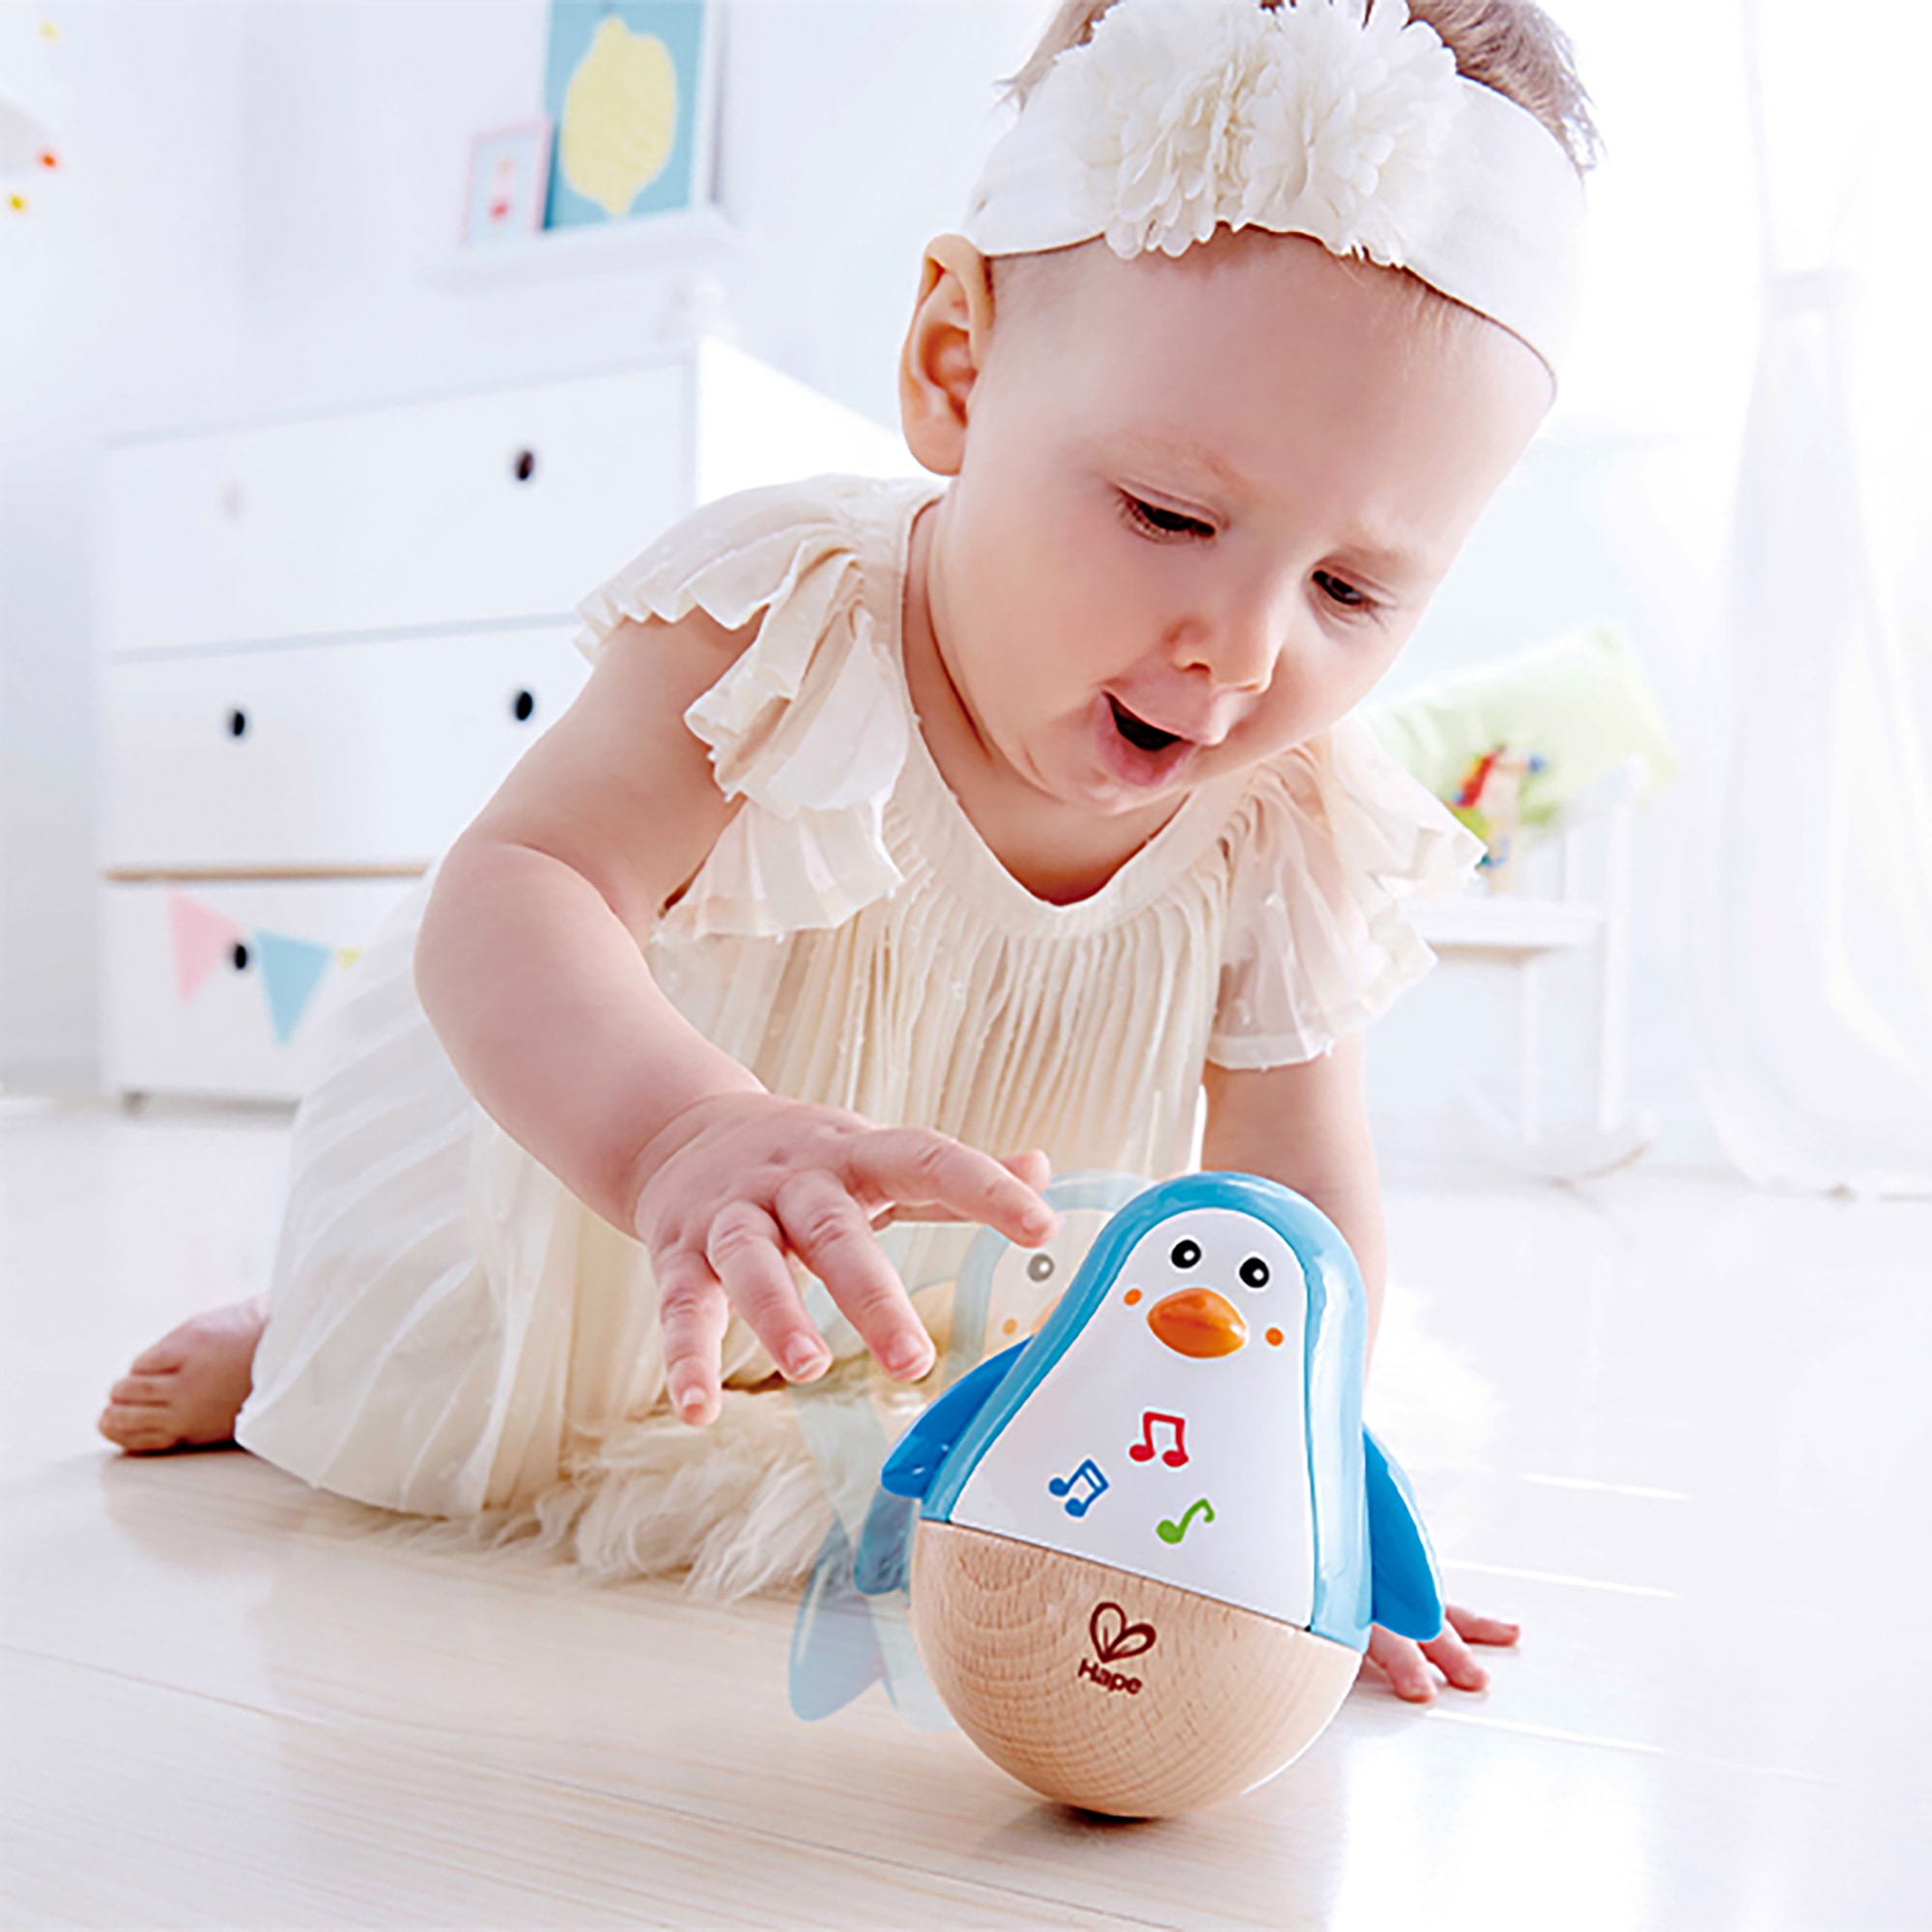 Hape: Penguin Musical Wobbler W/ Tinkling Sounds & Moving Arms As It Waddles - image 4 of 7